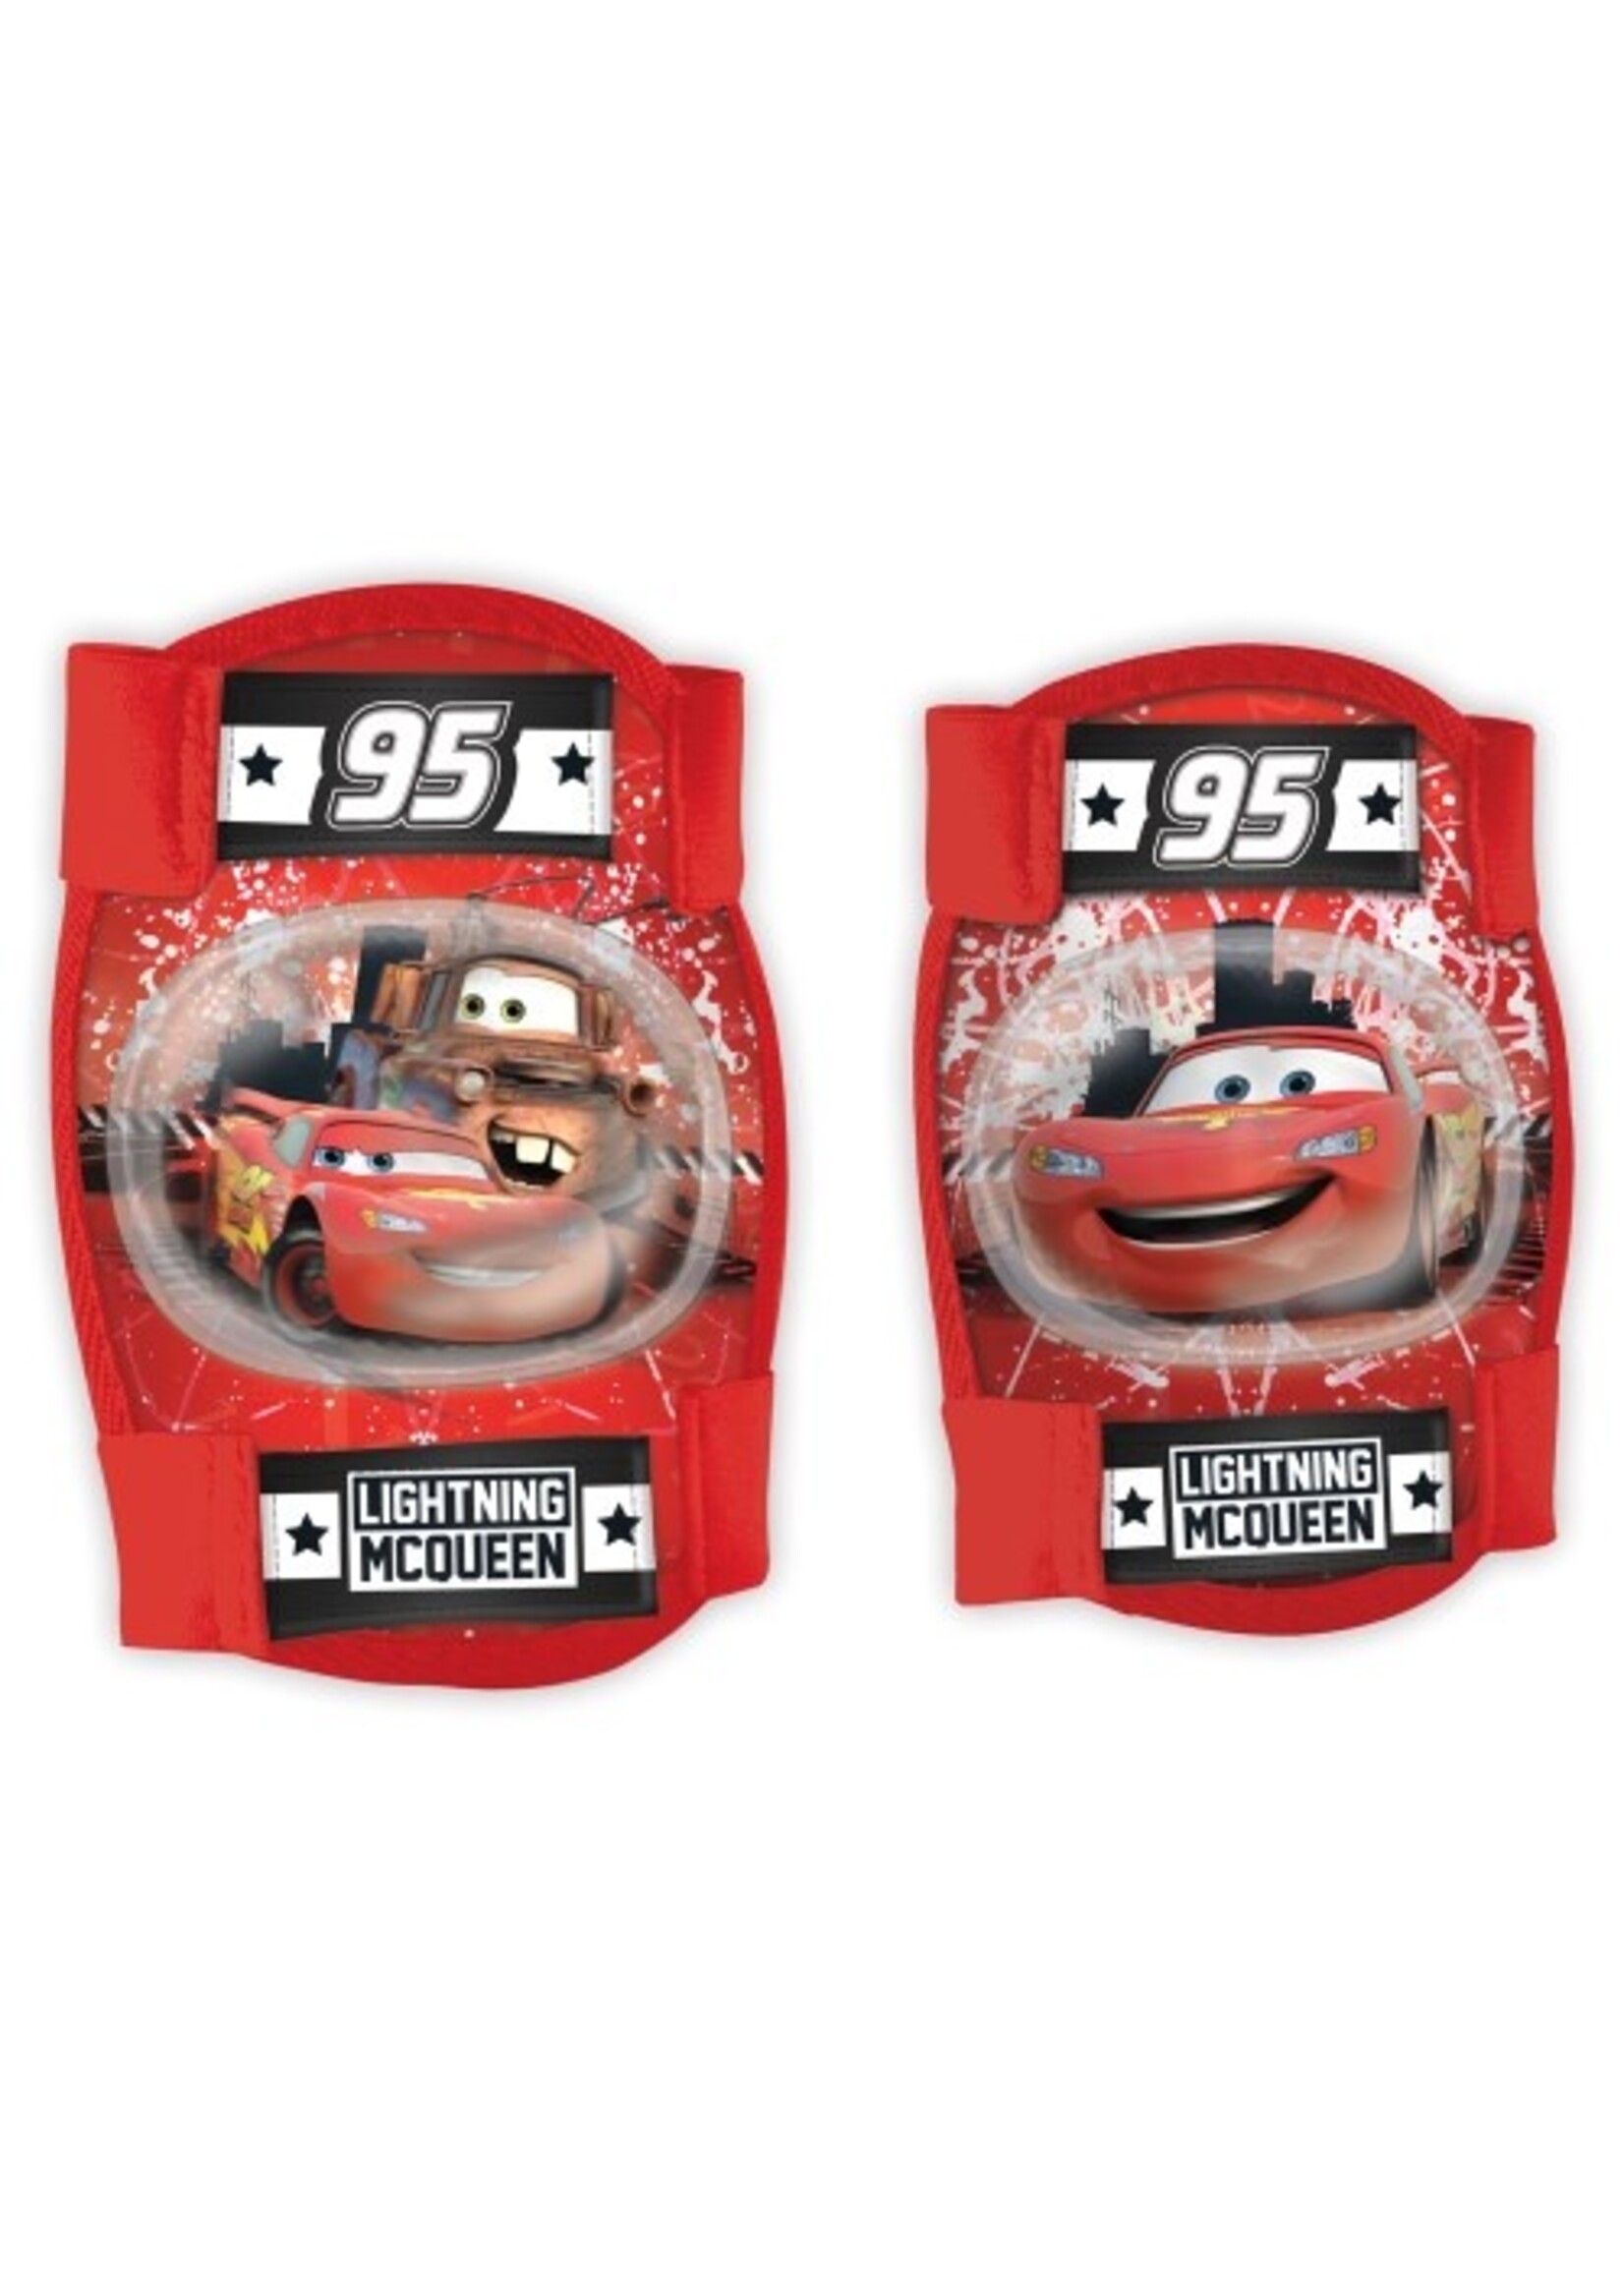 Disney Cars knee-elbow pads from Disney red